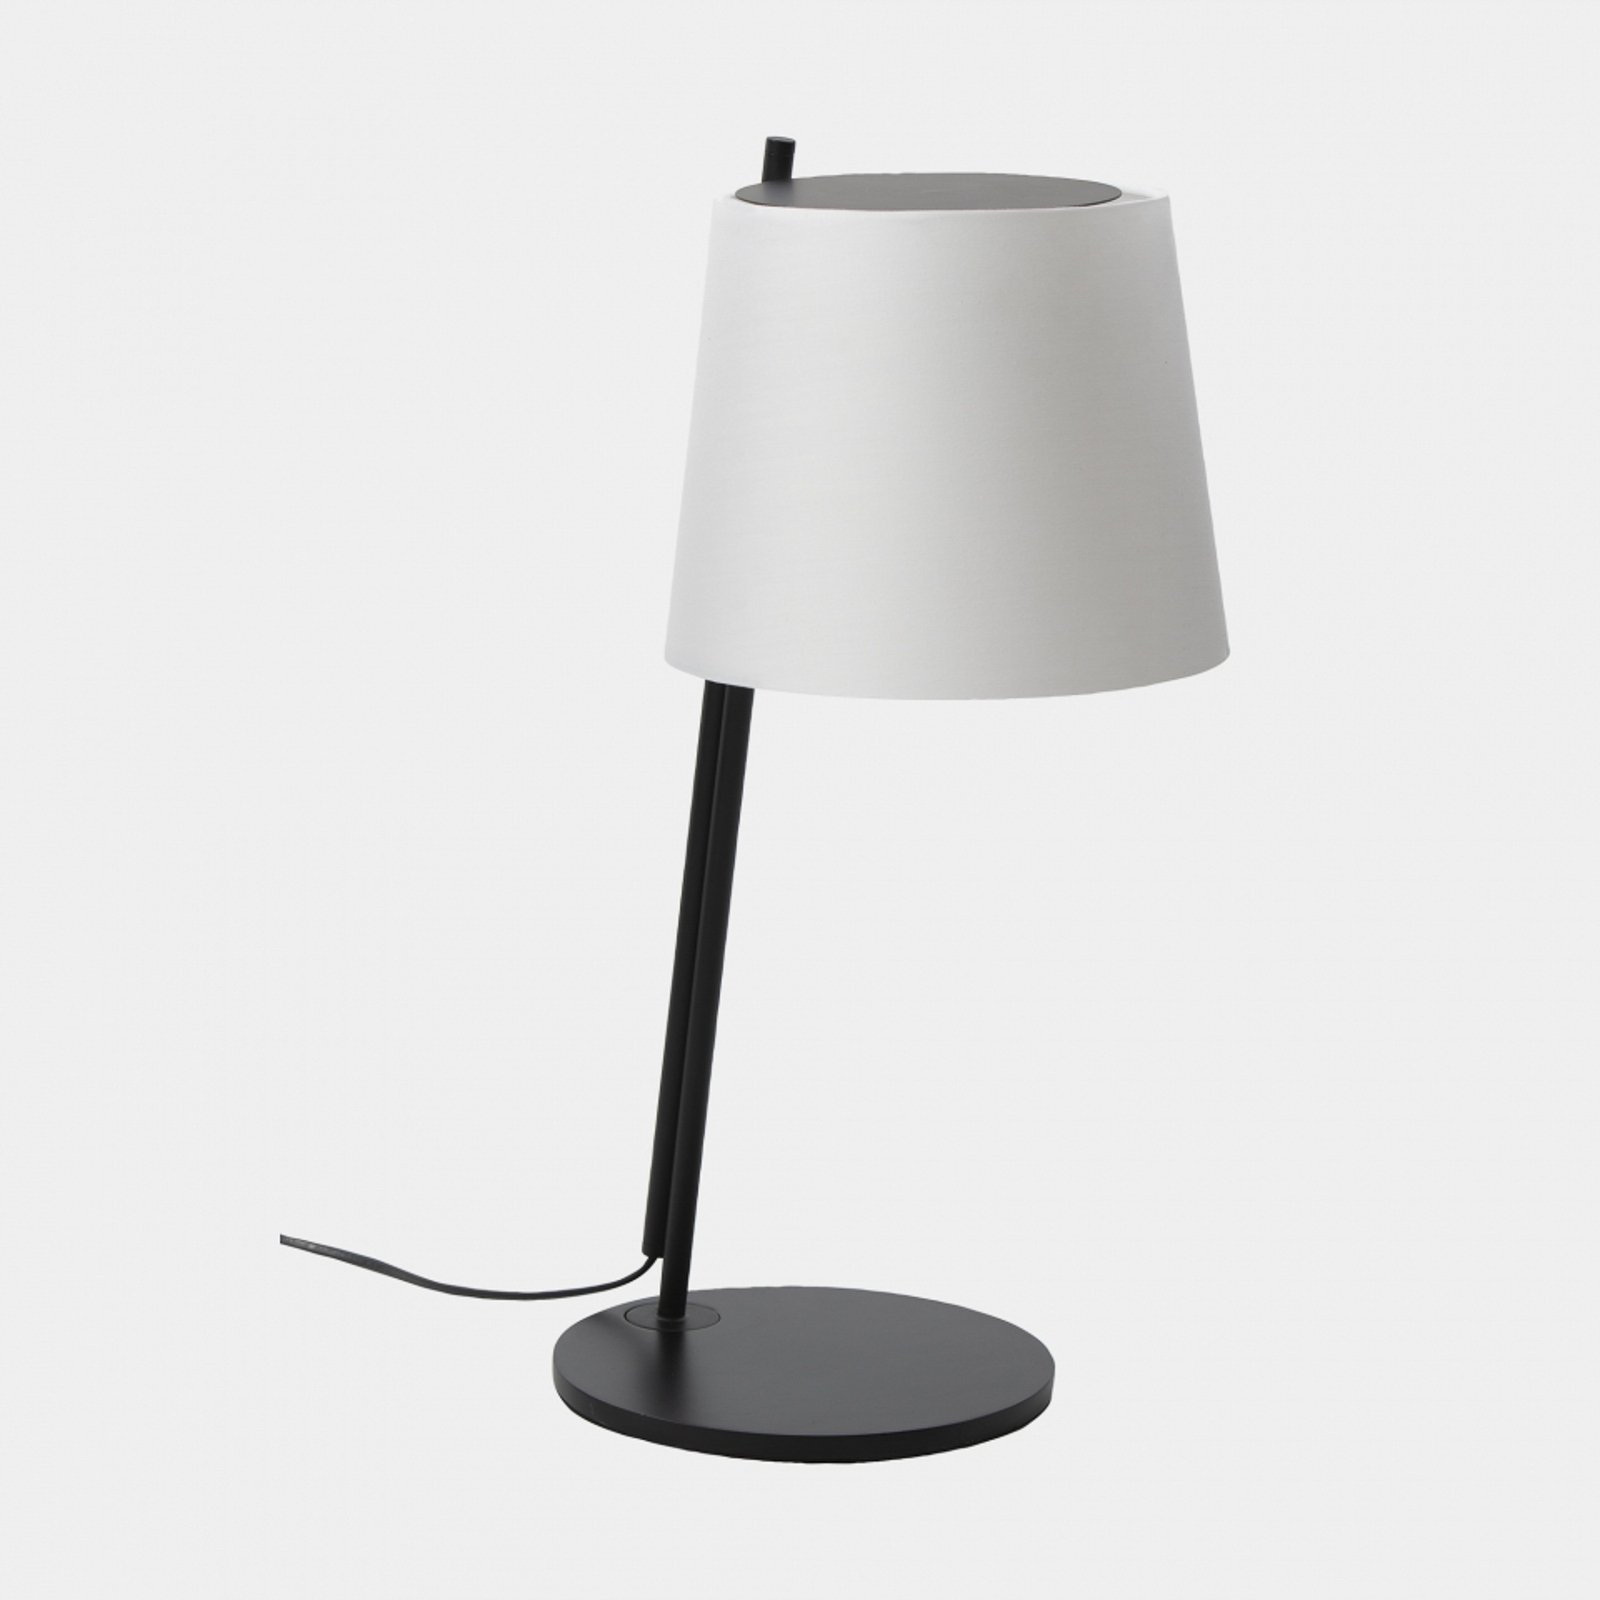 LEDS-C4 Clip table lamp H 49 cm white lampshade